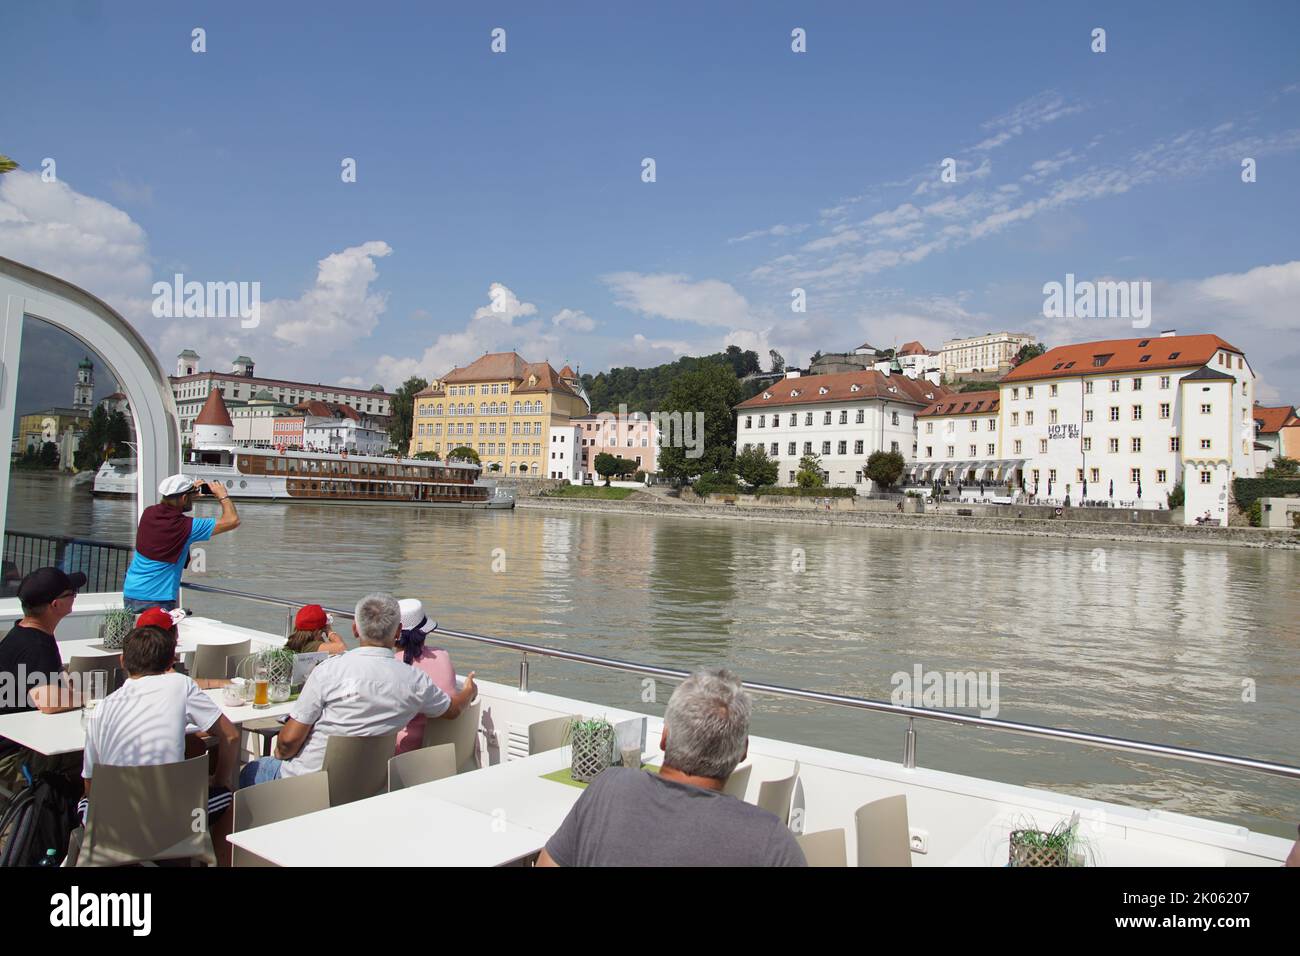 White deck with people on a sightseeing boat looking at the German city of Passau, sailing on the Inn river. Summer, August, Germany. Stock Photo